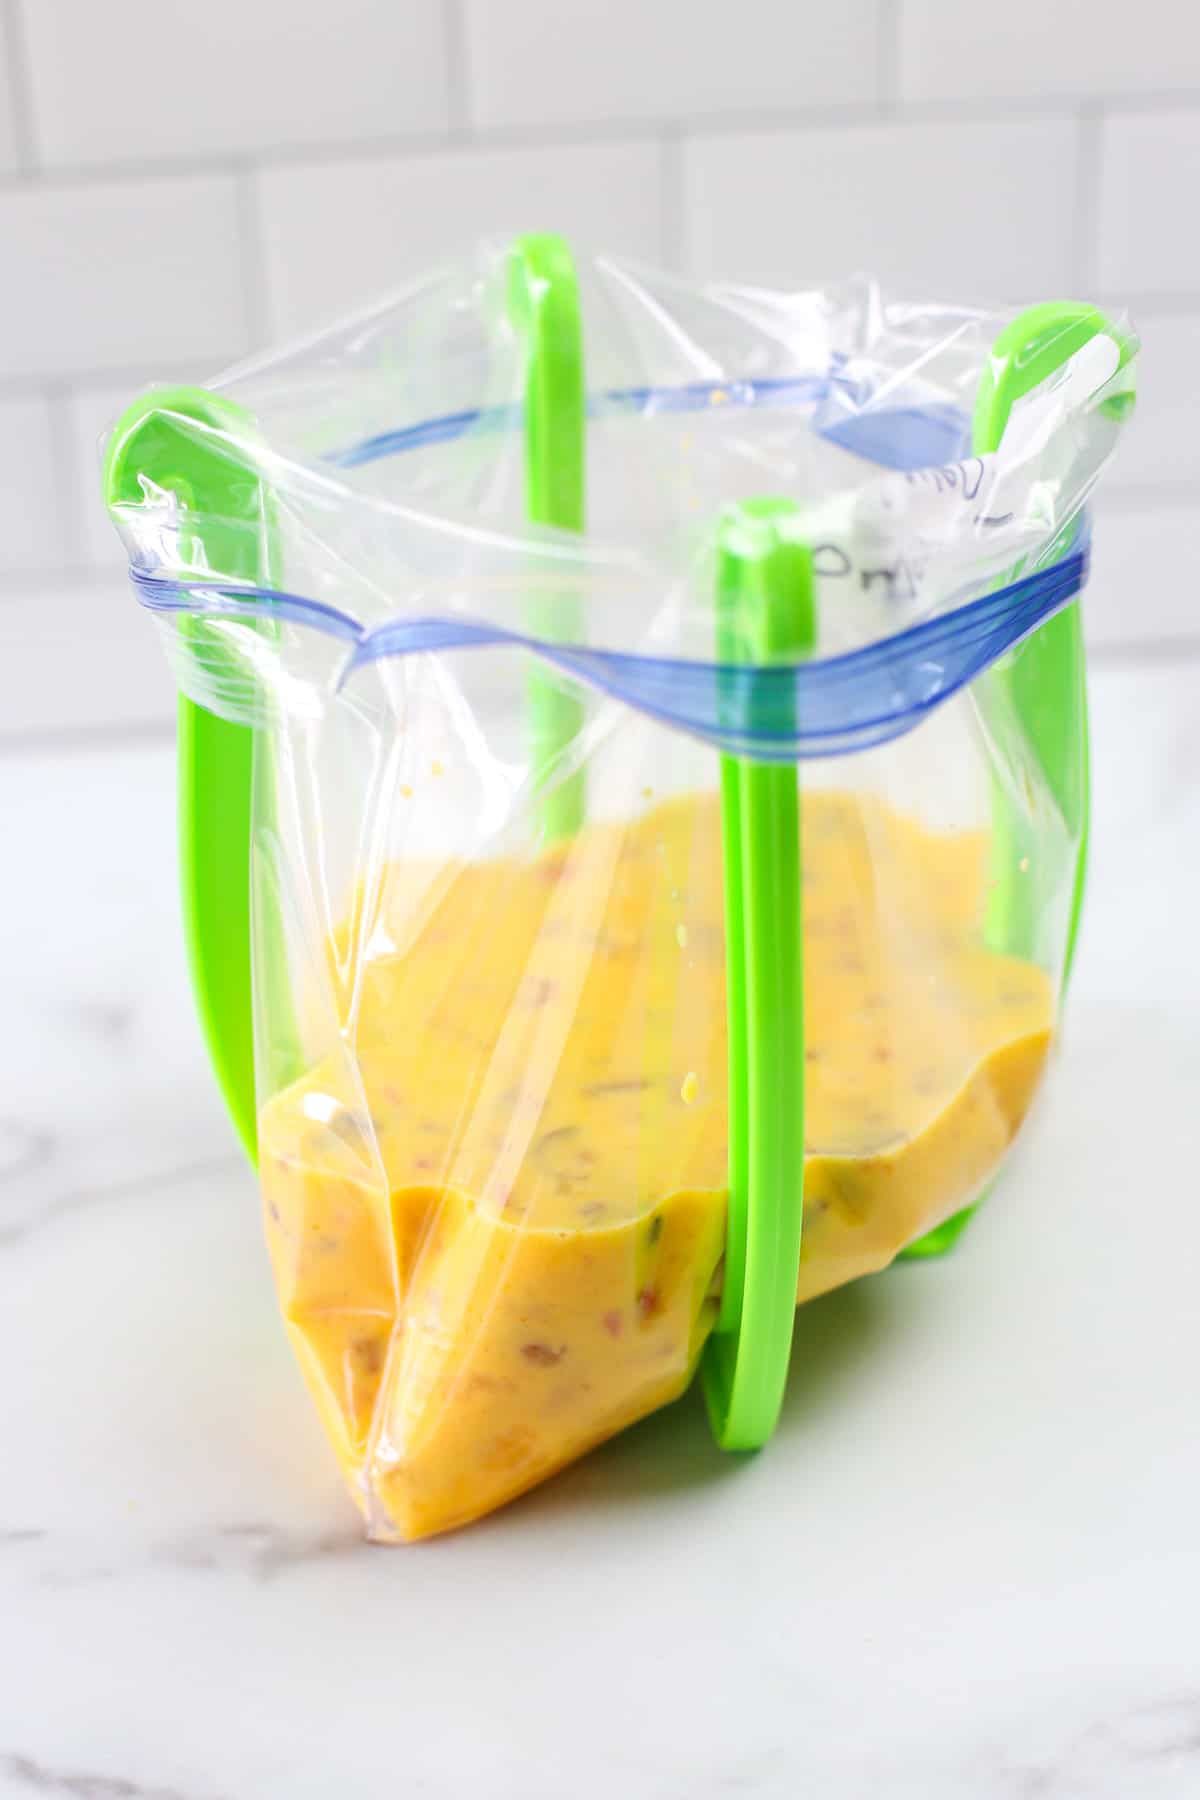 Baked omelette mixture in a freezer bag that is in a freezer bag stand.